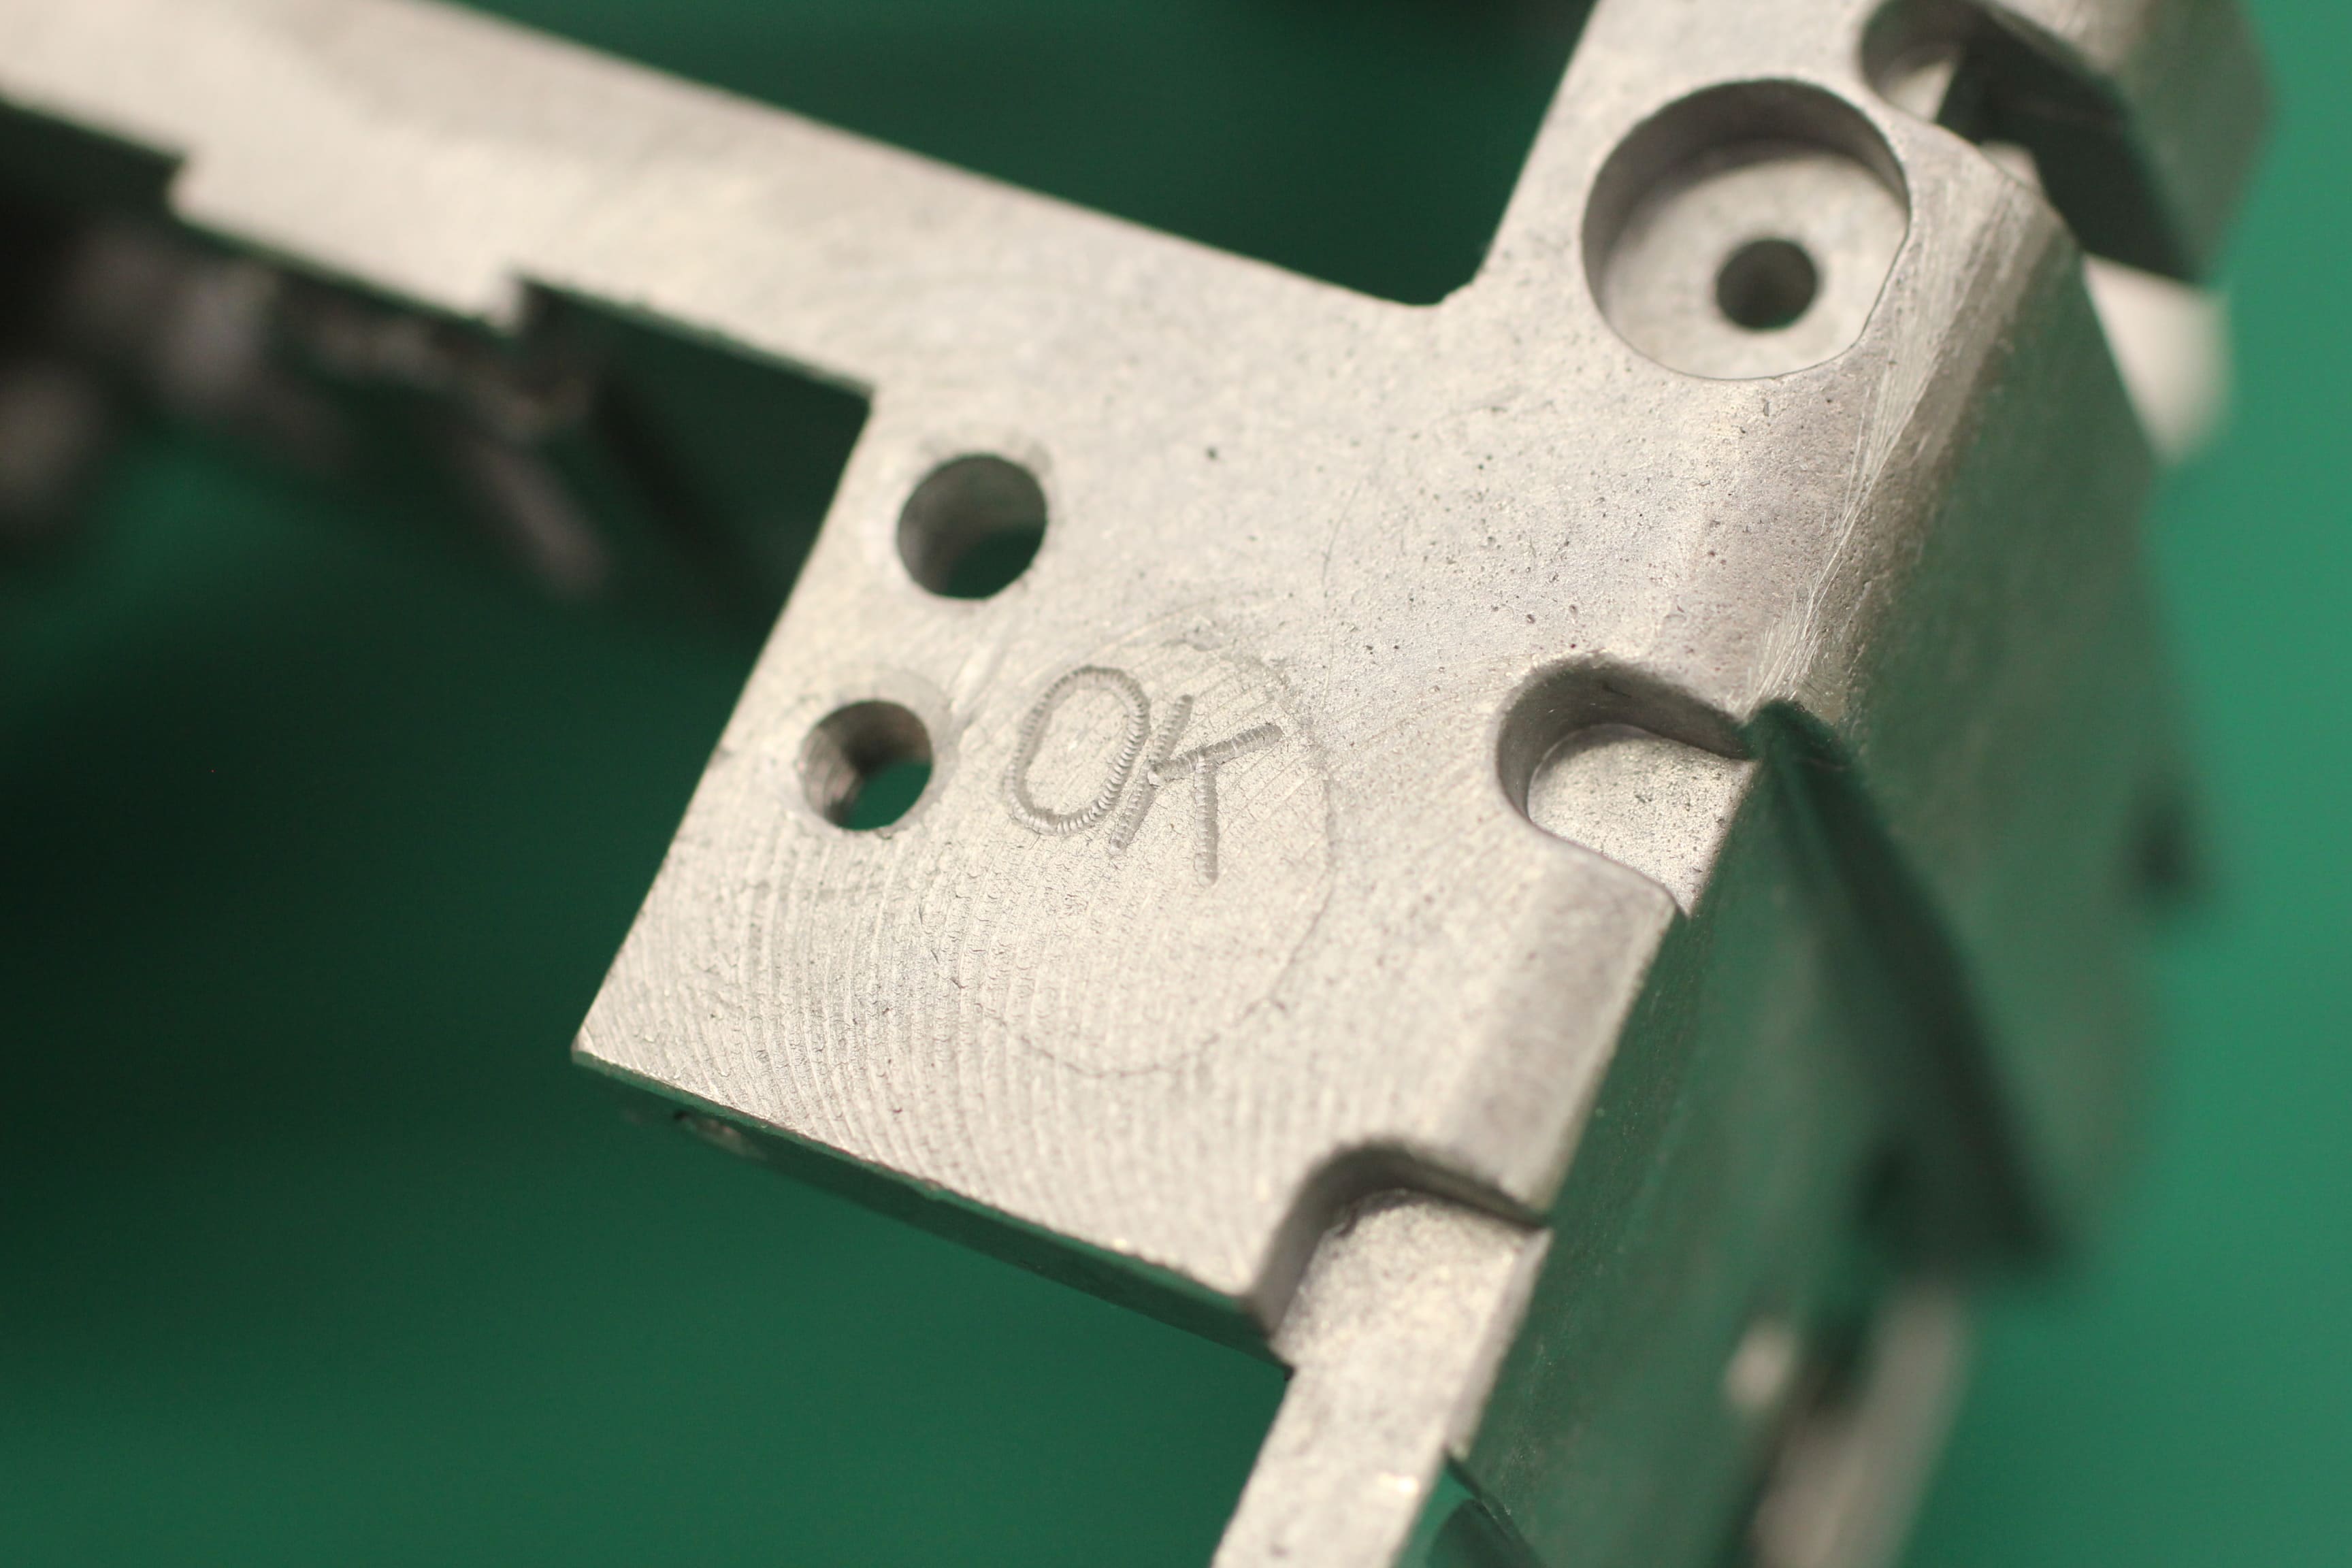 Image of an aluminum cast with the word 'OK' engraved on it.